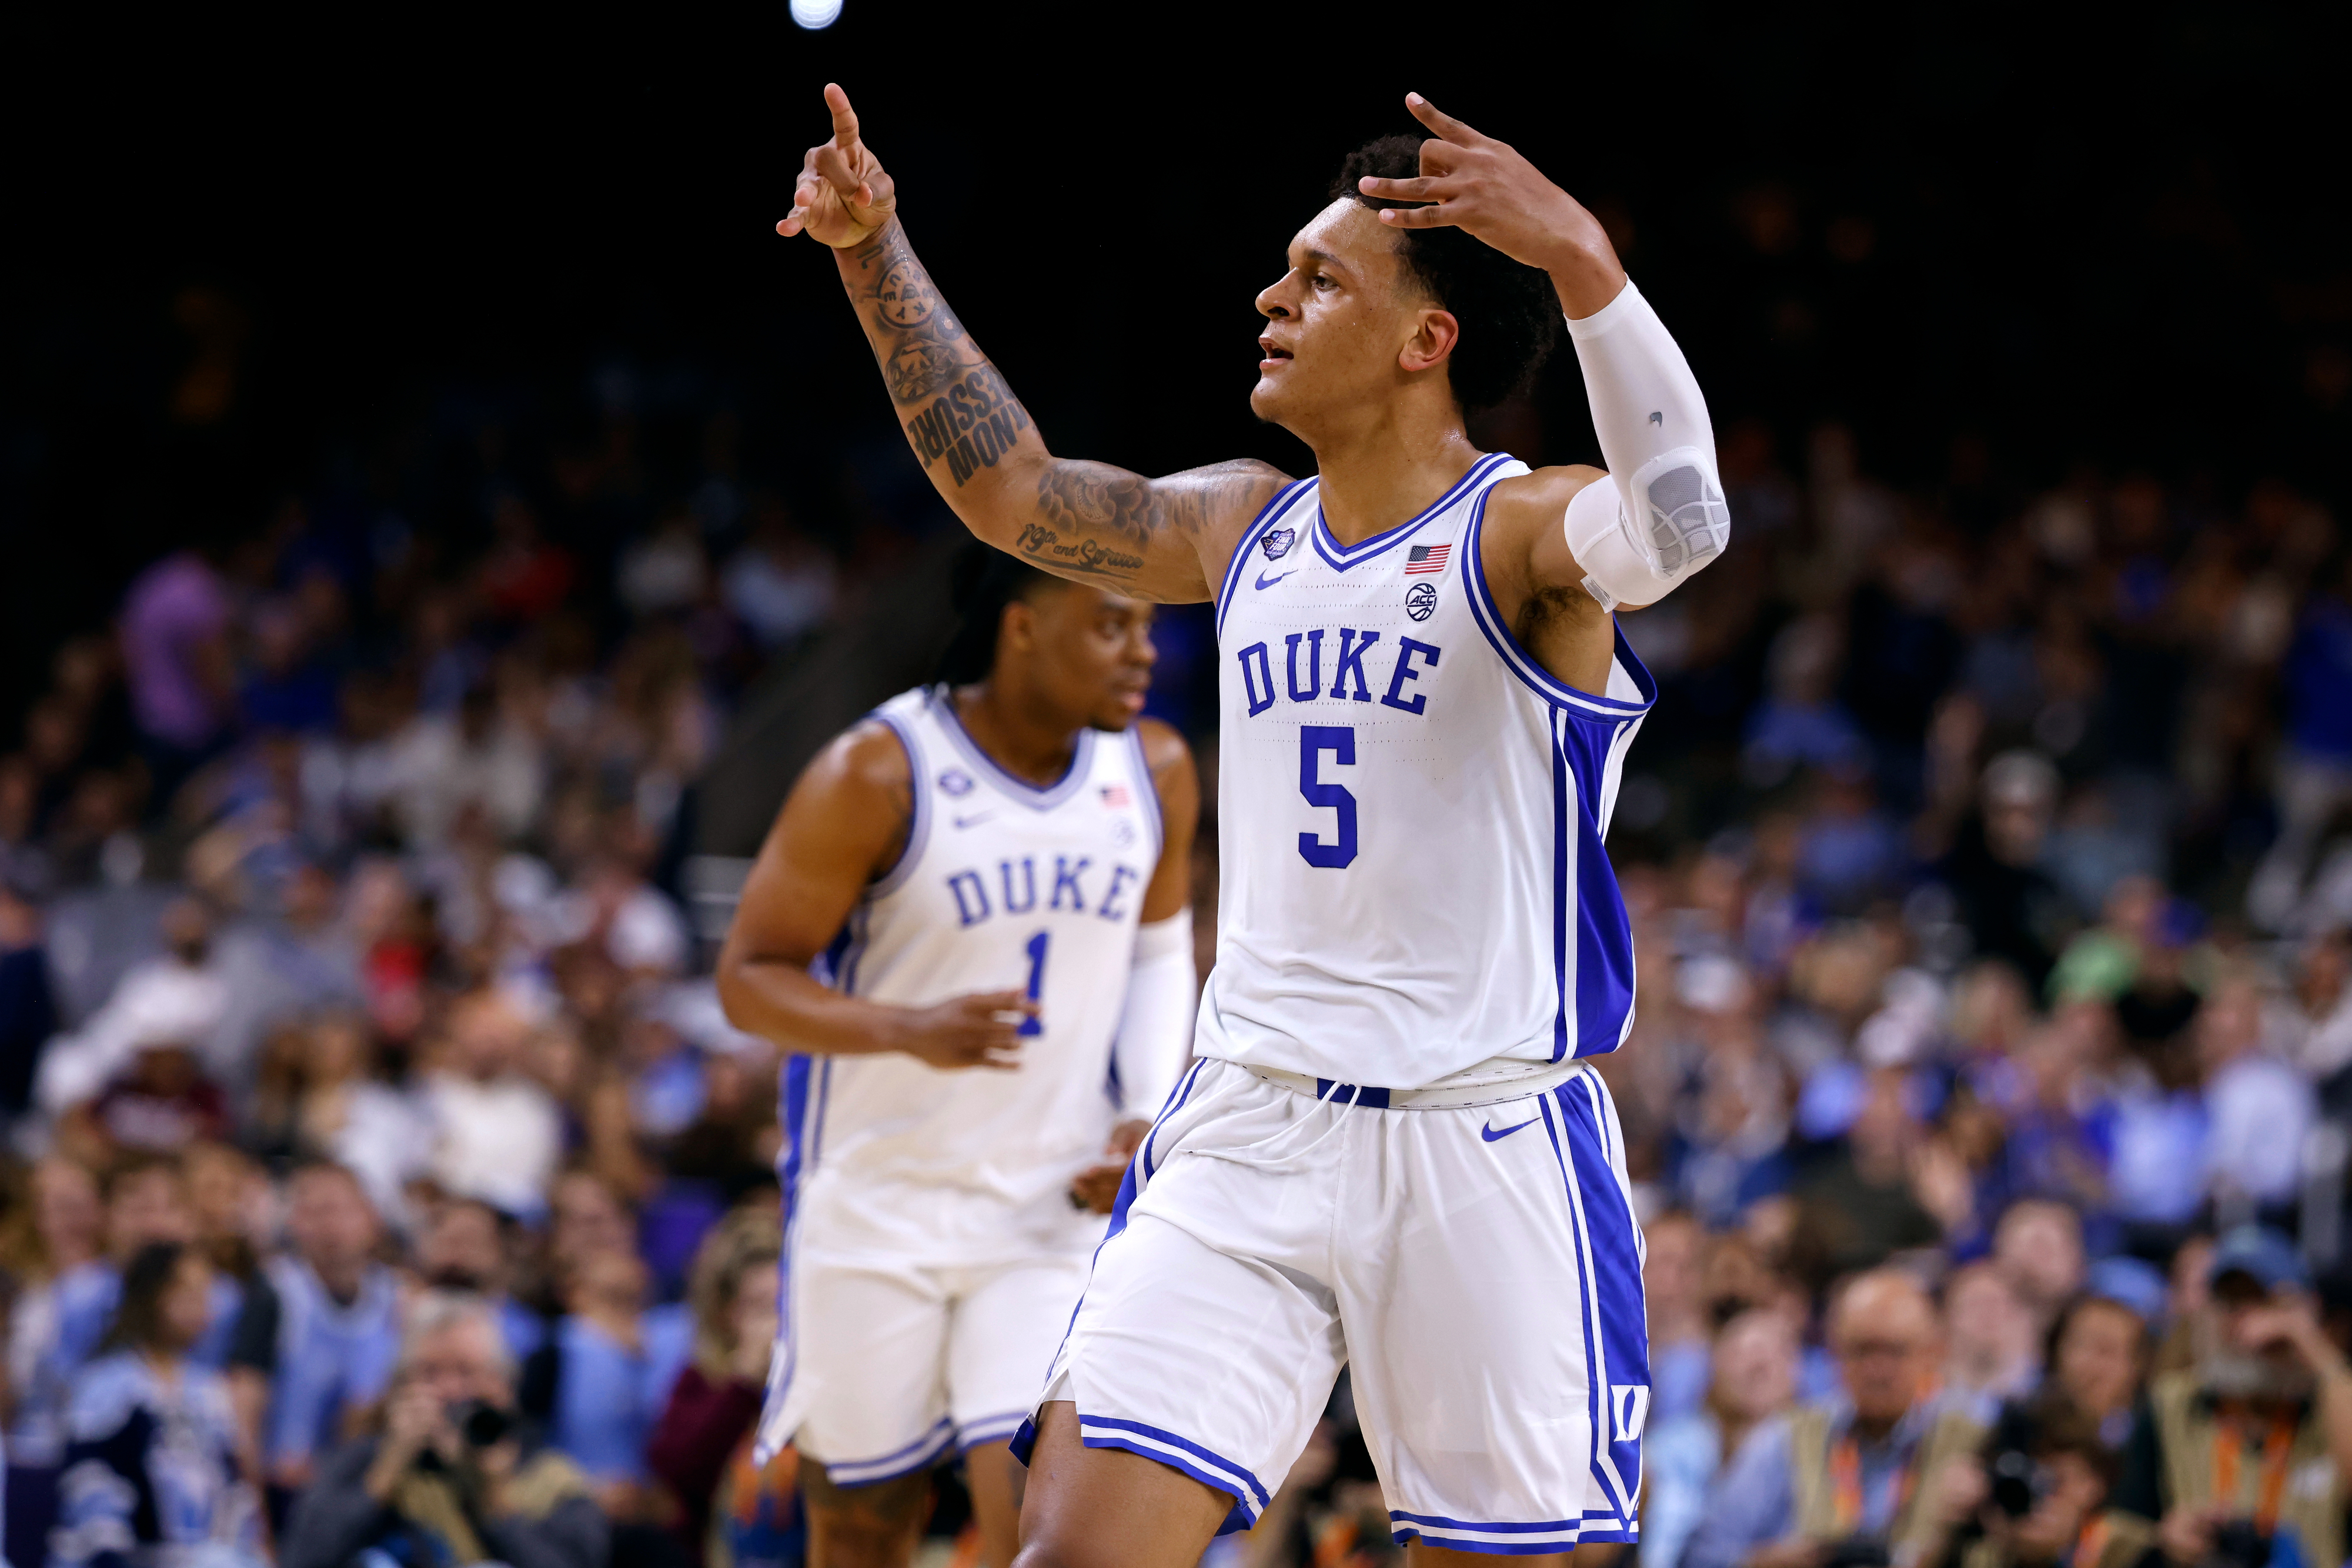 Duke basketball player #5 gestures triumphantly on the court during a game